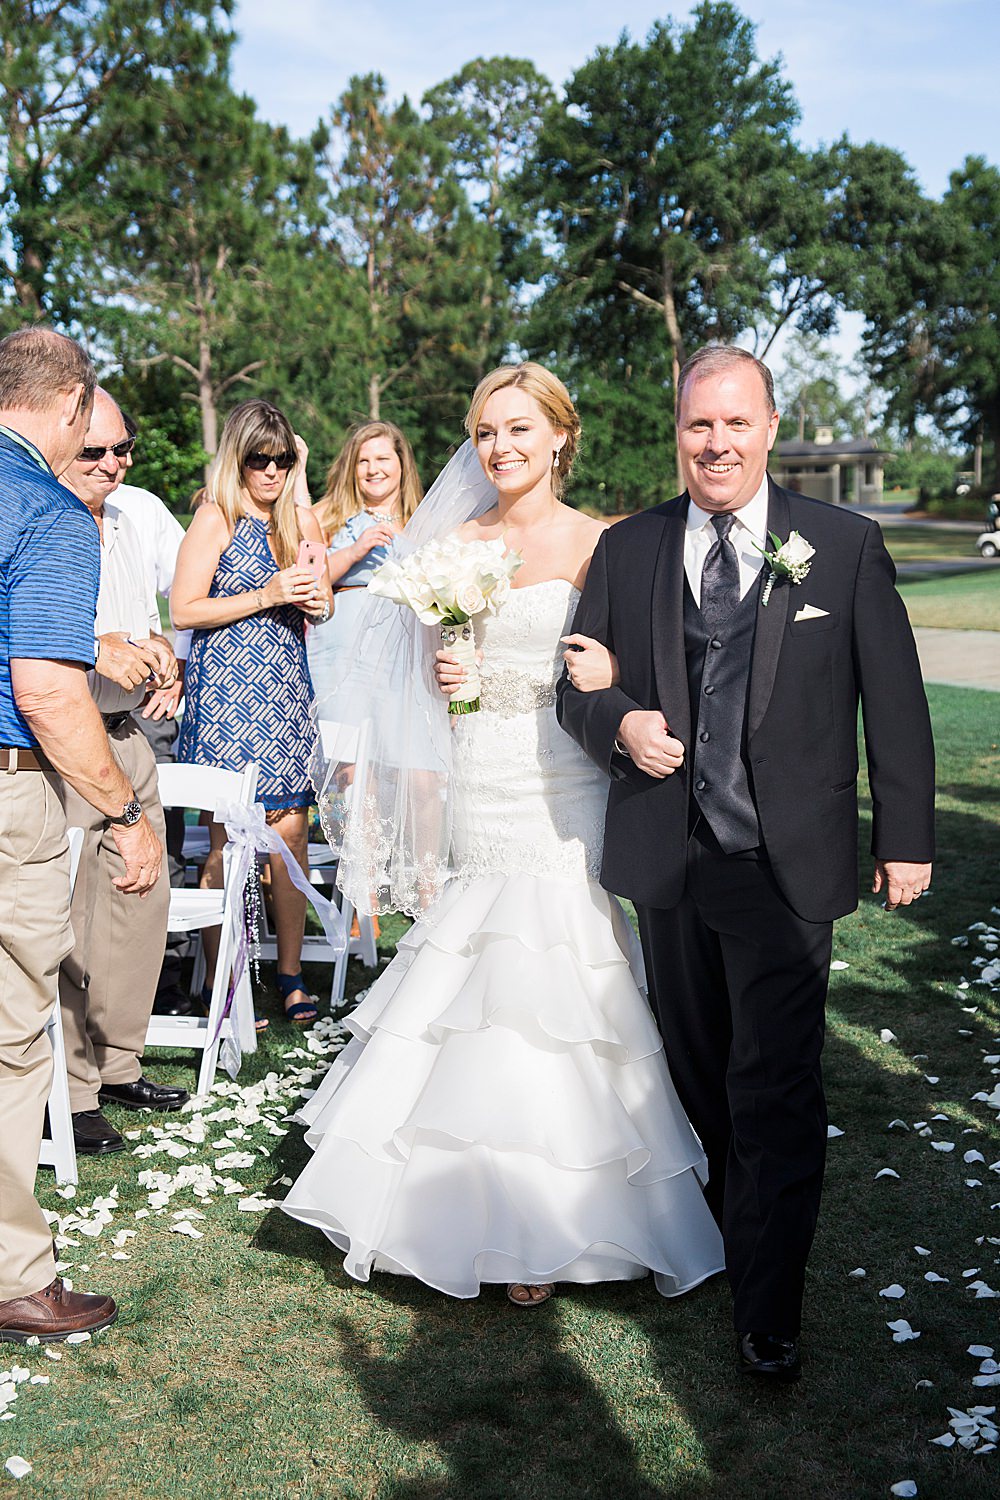 Bride and dad are all smiles as they walk down the ceremony aisle